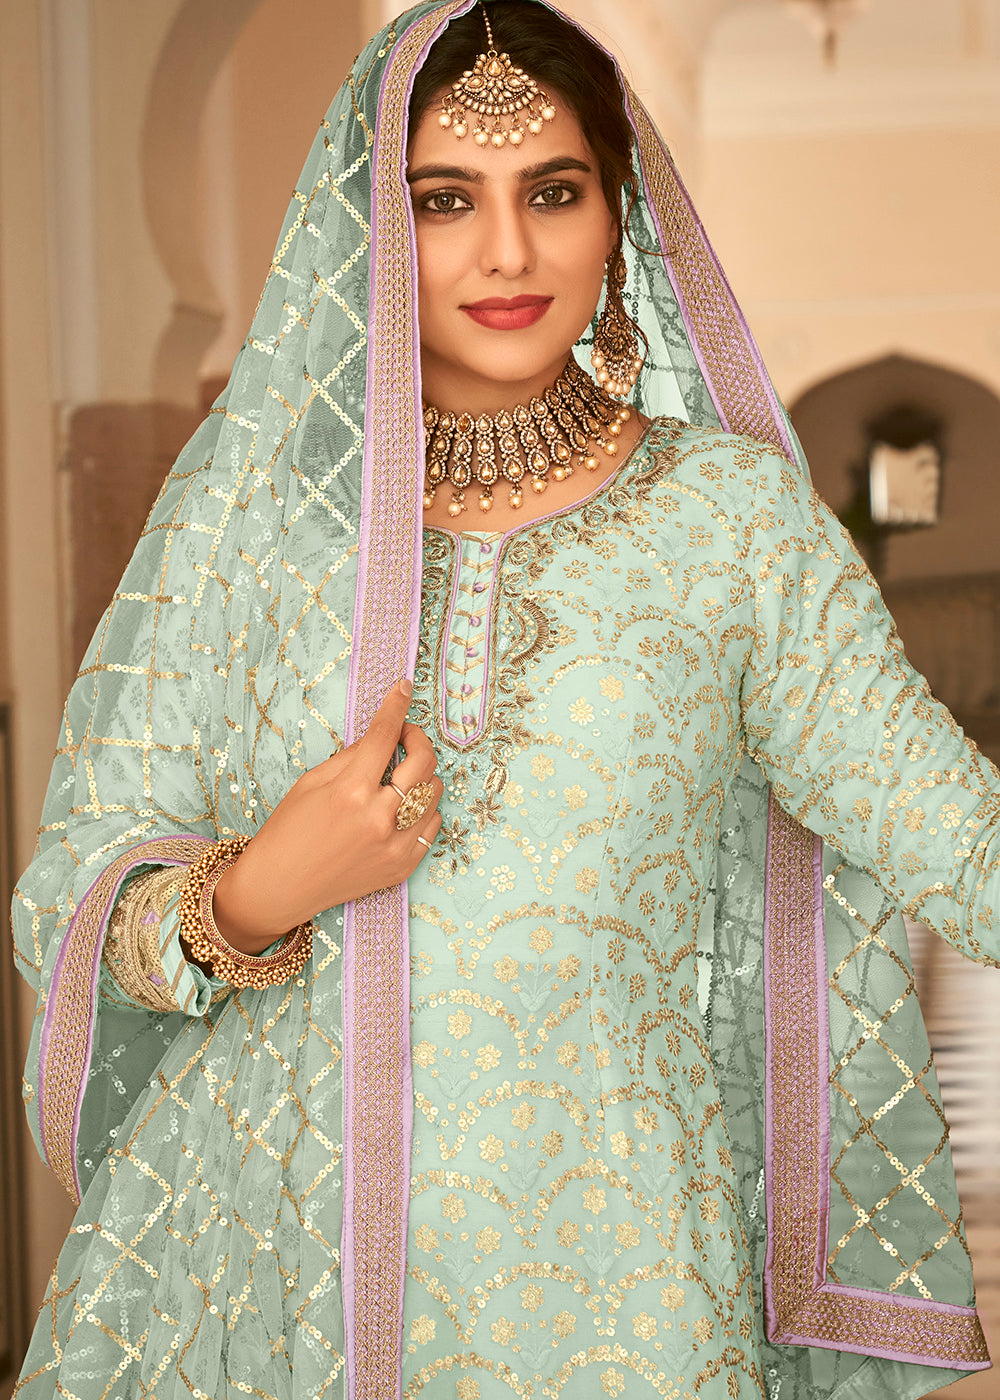 Shop Now Ice Blue Sequins Embellished Wedding Wear Sharara Style Suit Online at Empress Clothing in USA, UK, Canada, Germany & Worldwide.